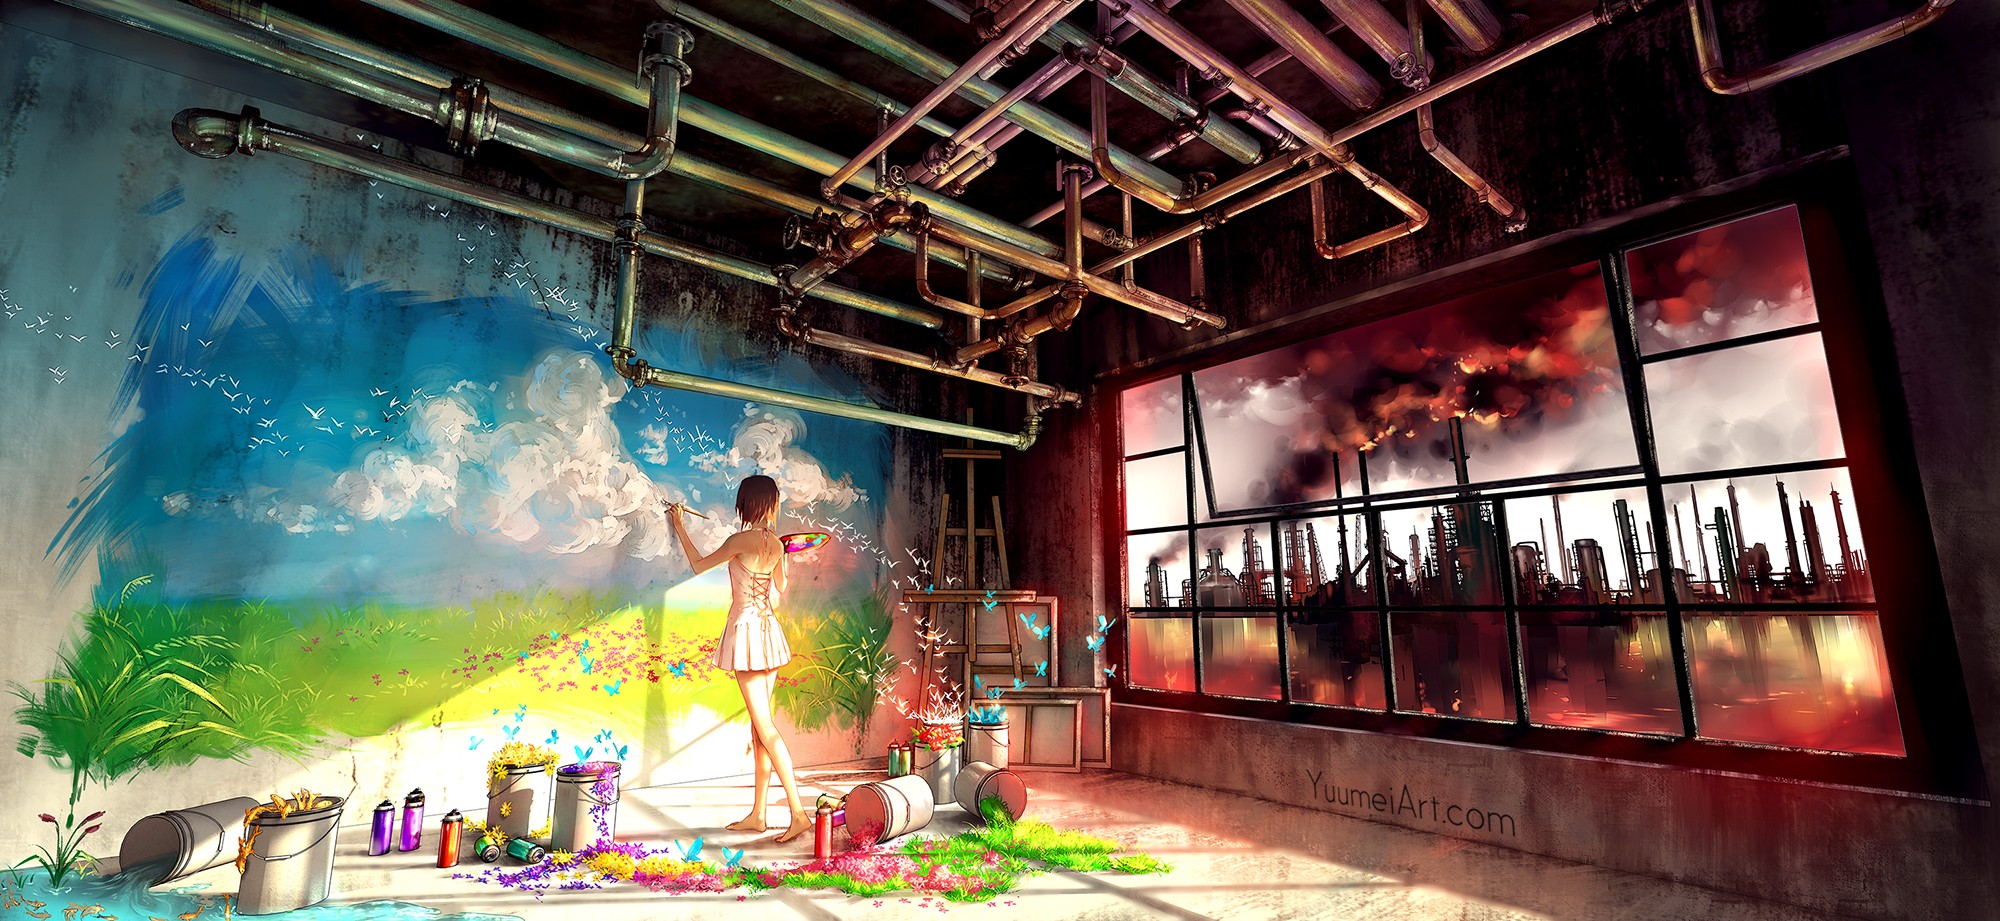 Yuumei Pipes Room Industrial City Painters Contrast Colorful Painting Yuumei Cityscape Industrial Ci 2000x921